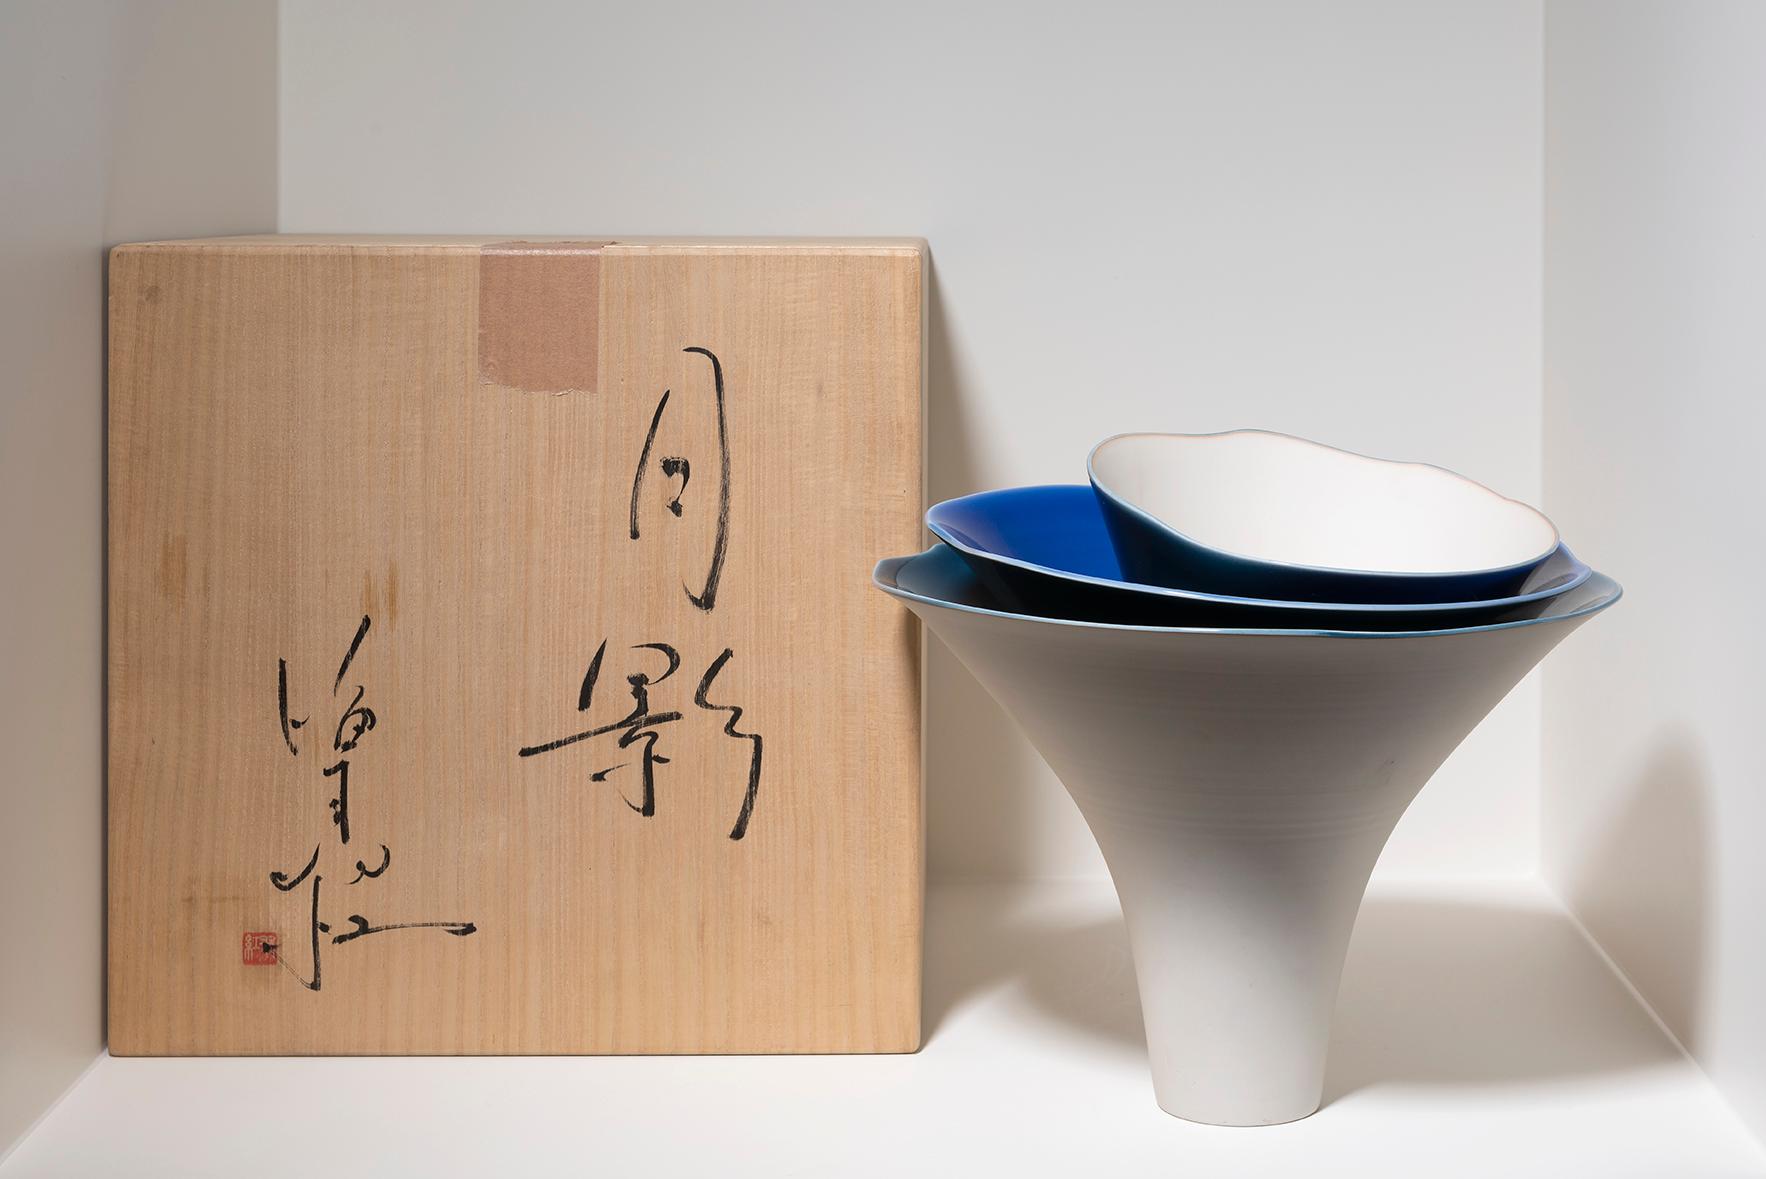 Signed and original box included
Fukumoto Fuku is a leading Figure in the Contemporary Japenese Clay, recognized for her expertise in the art of traditional pottery.

Her work 